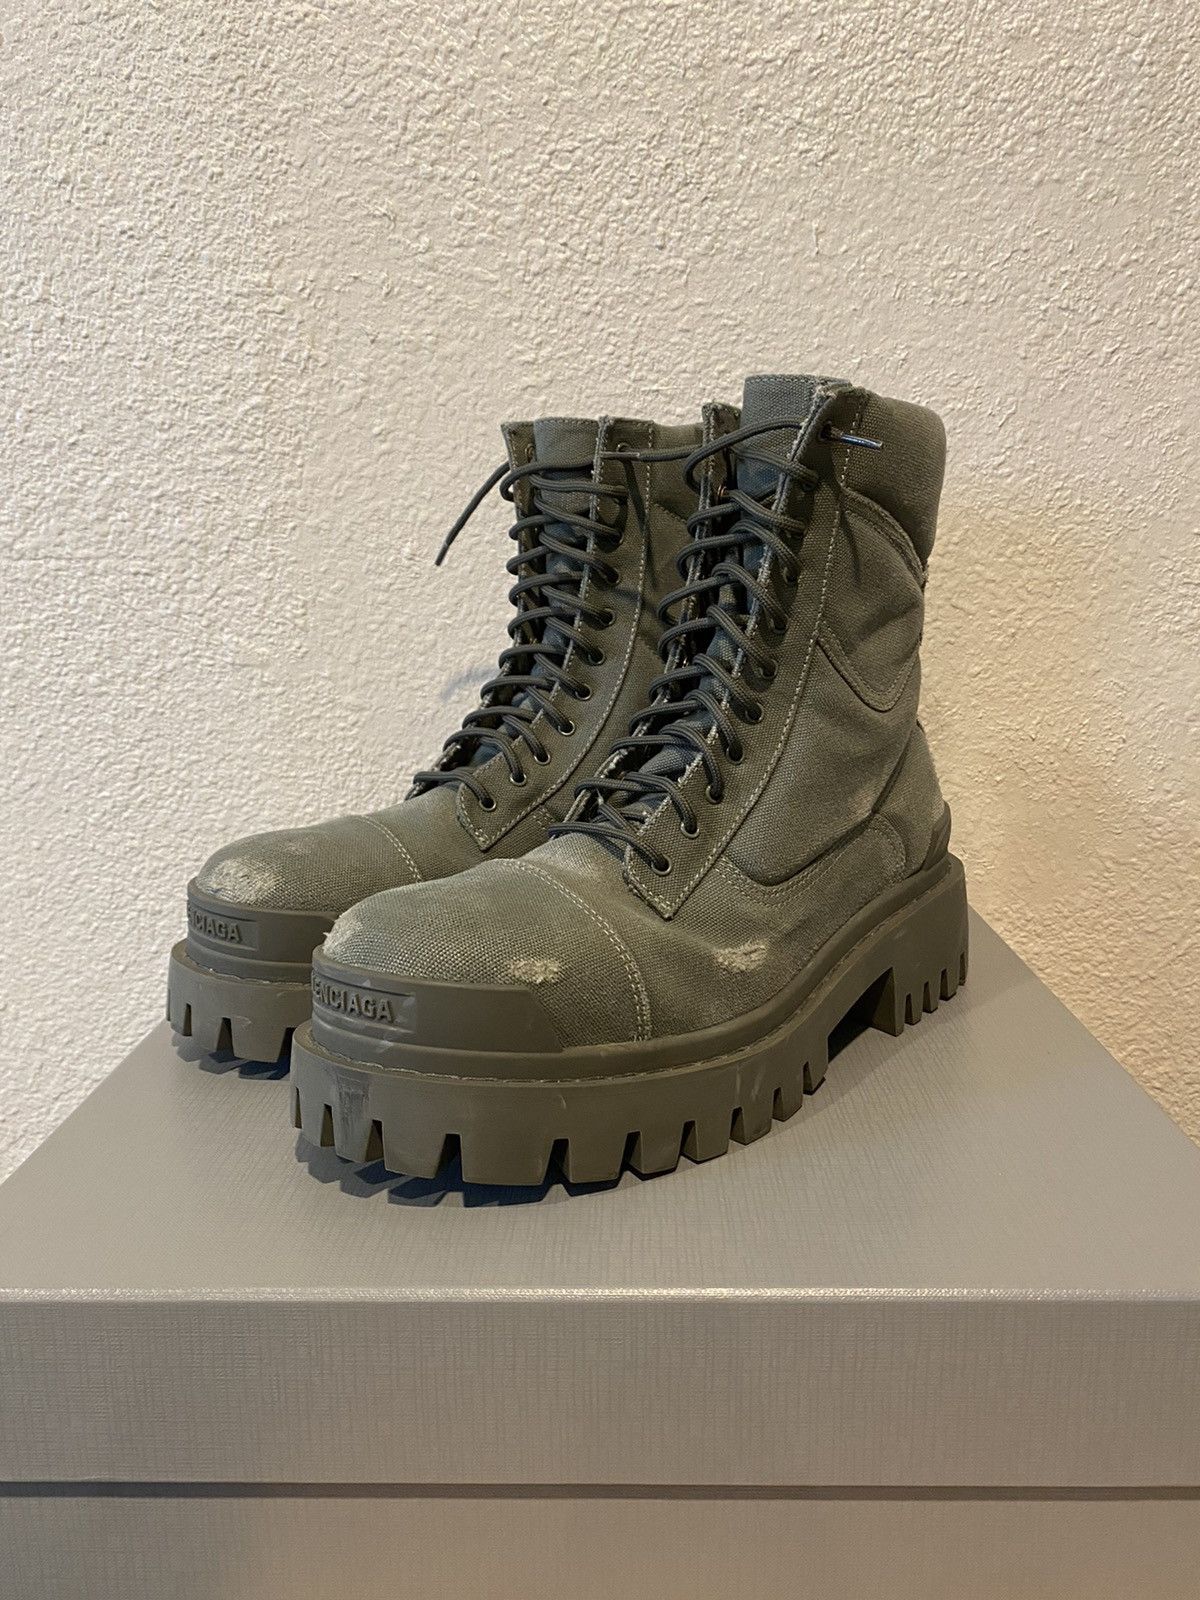 Balenciaga Destroyed Canvas Combat Strike Boots (40) Fits 41 | Grailed